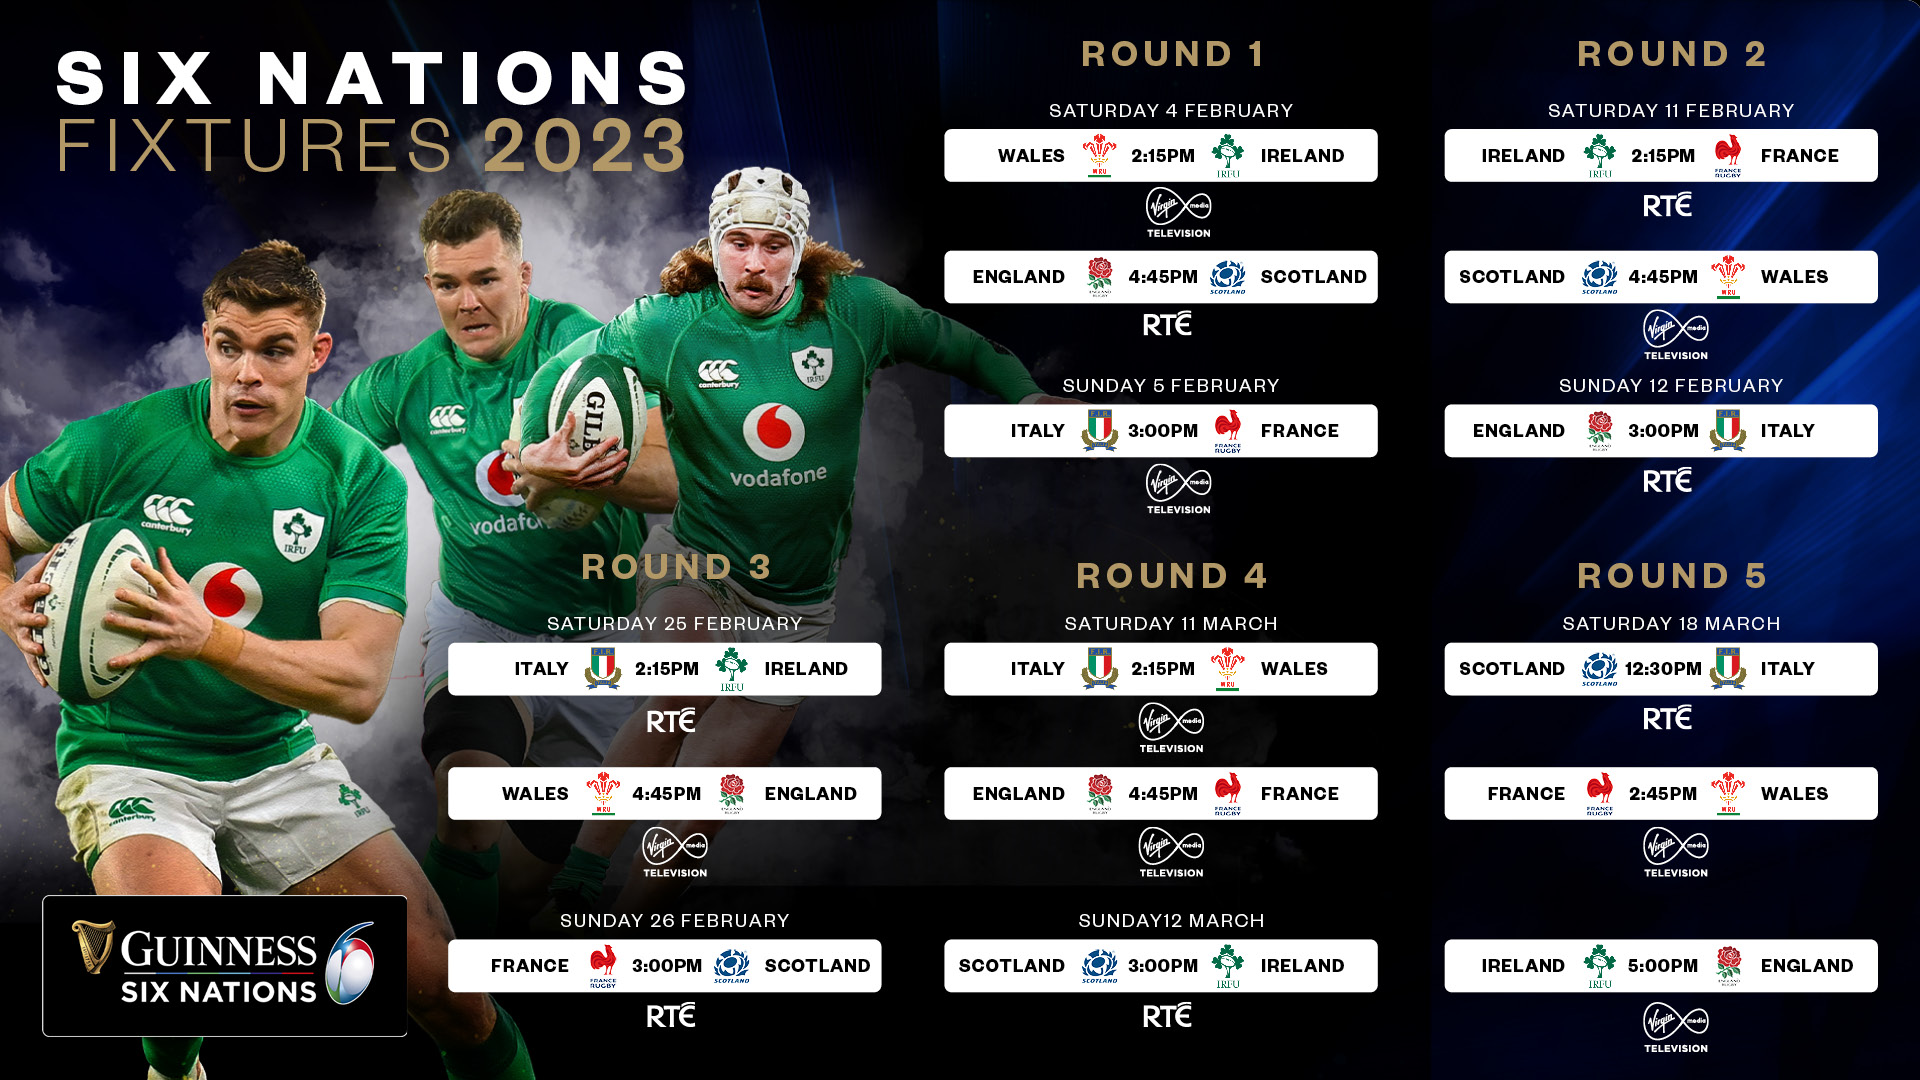 RTÉ and Virgin Media Television bring you every game in the Guinness Six Nations Live